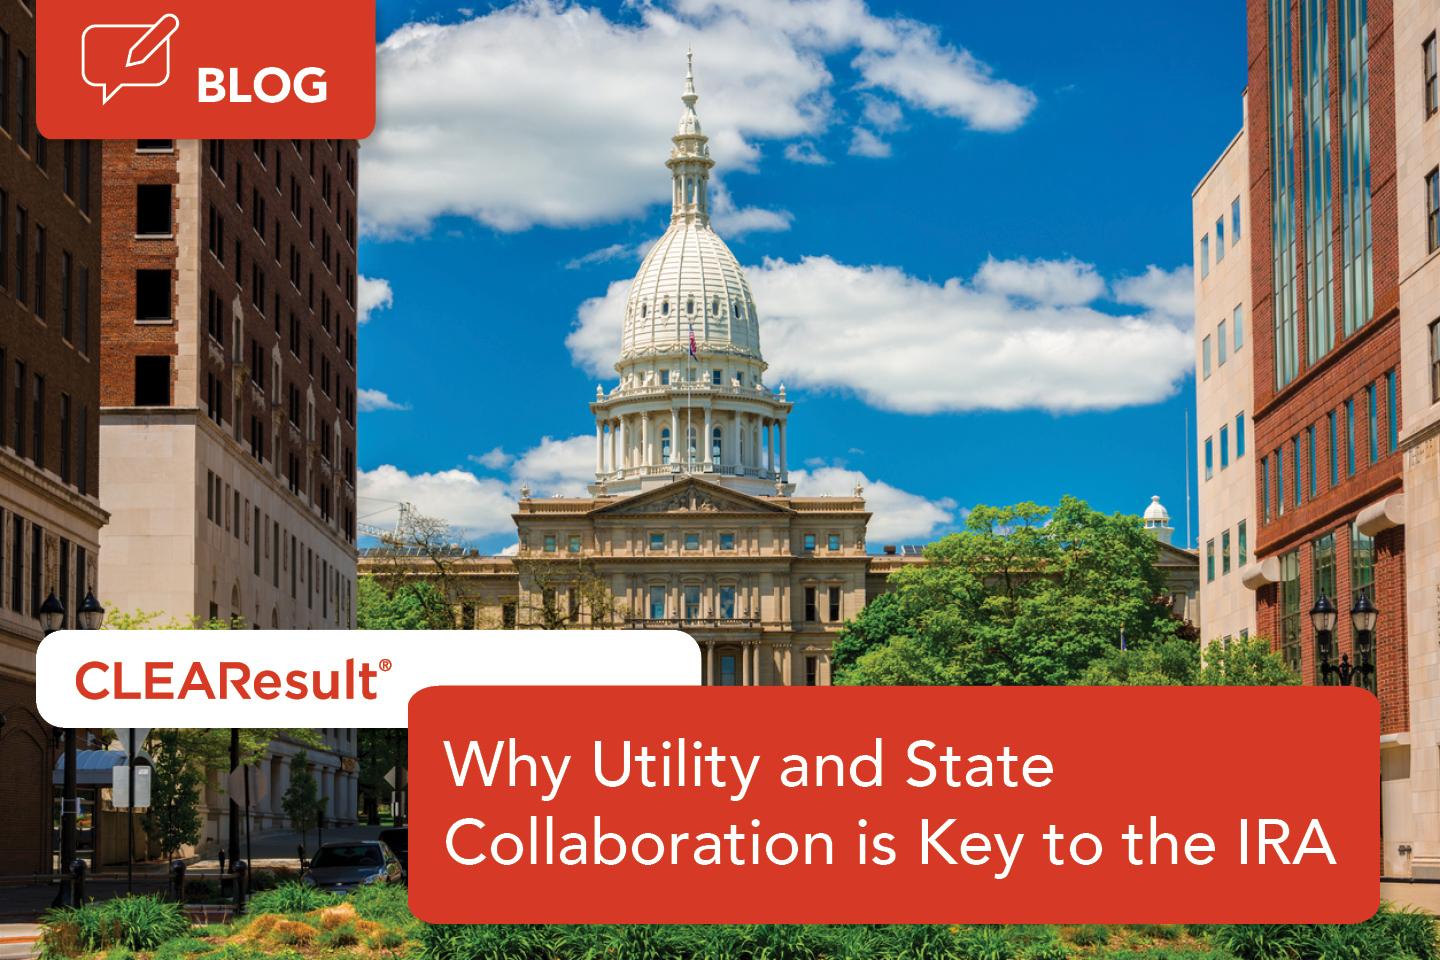 Why utility and state collaboration is key to making the Inflation Reduction Act work